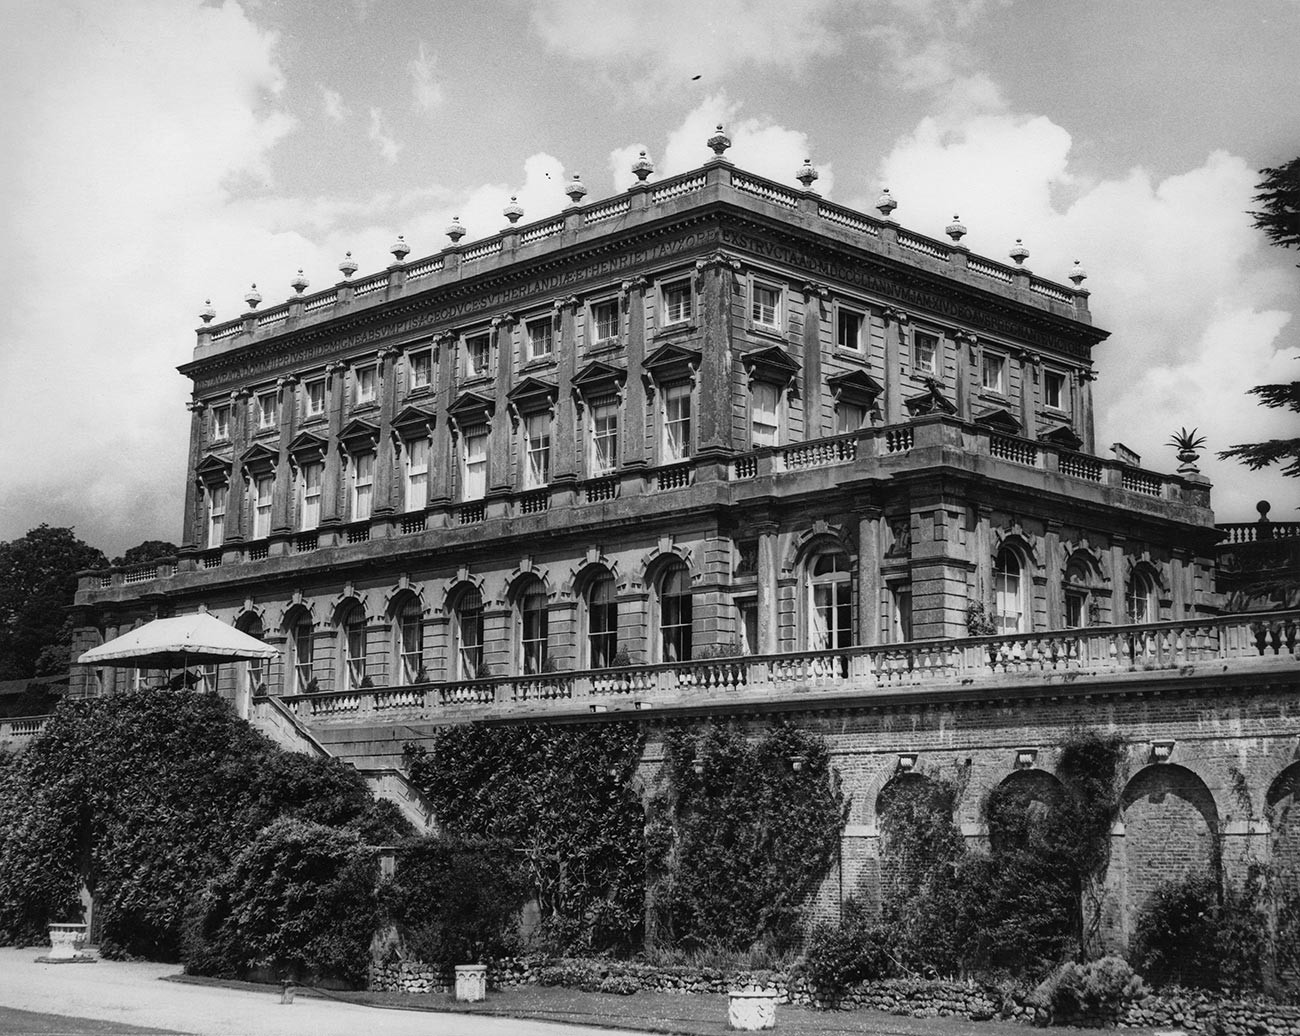 Cliveden, Lord Astor's mansion in Buckinghamshire, 28th June 1963.